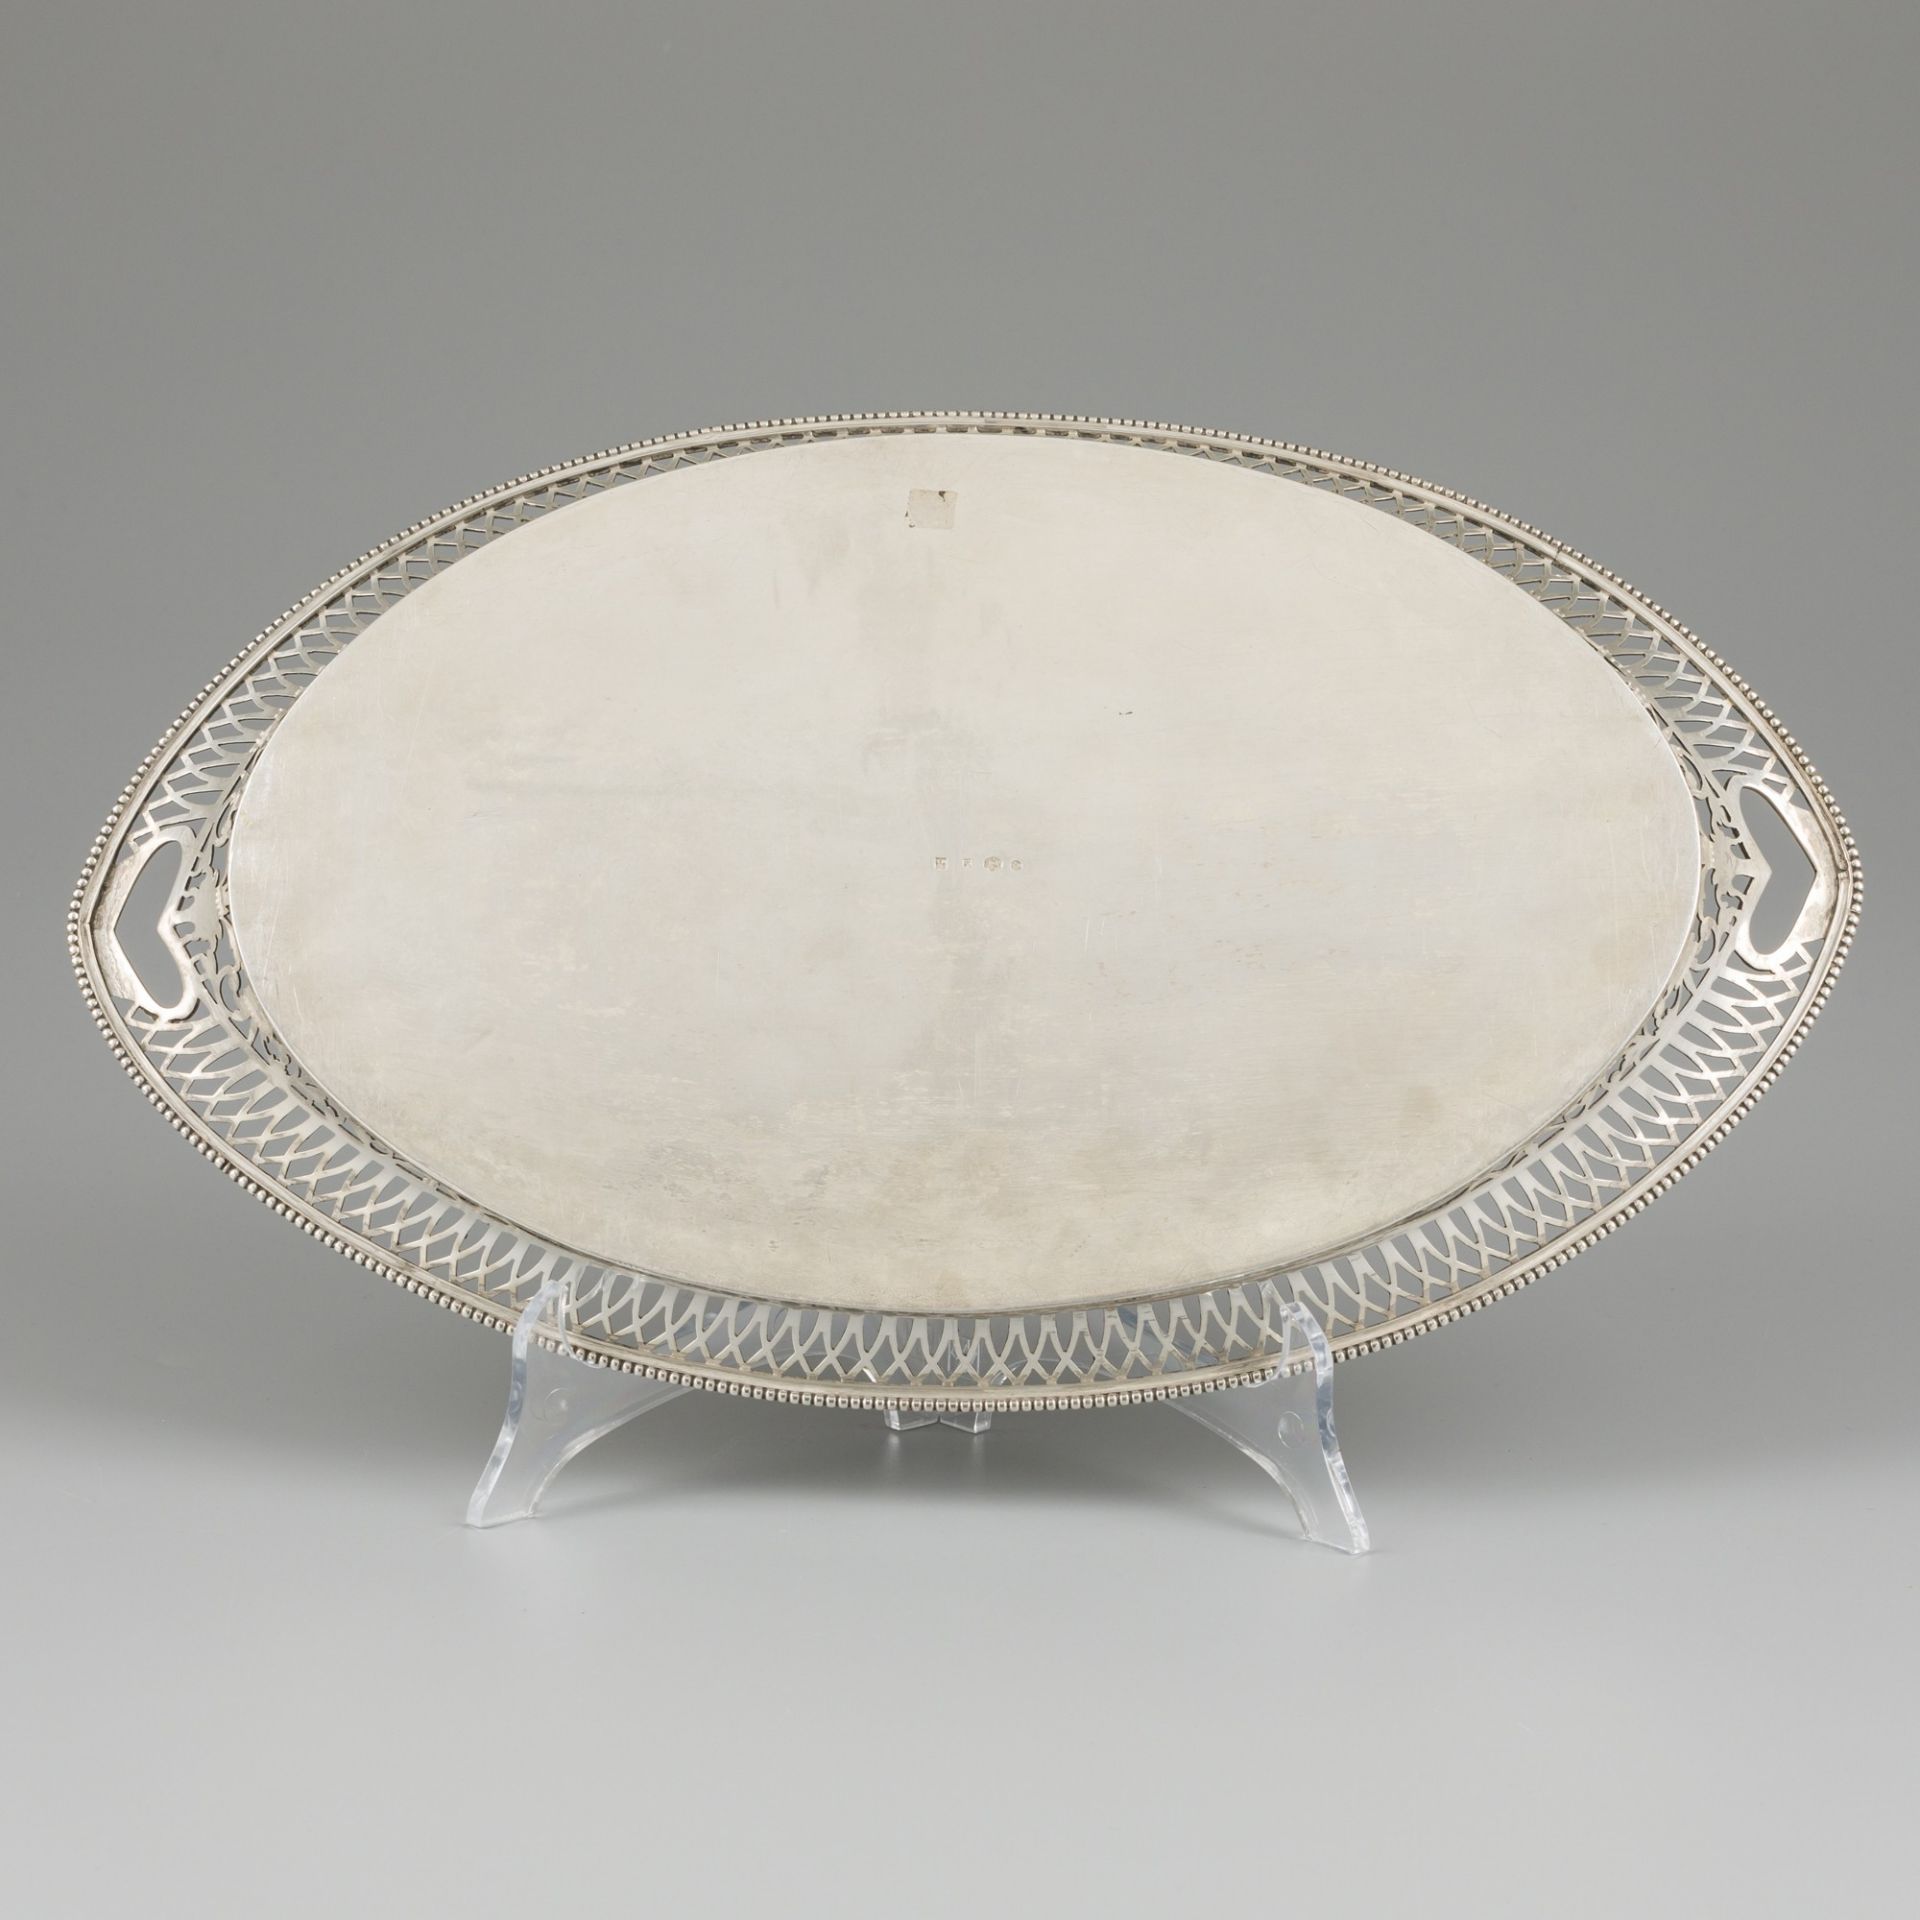 Silver serving tray. - Image 4 of 5